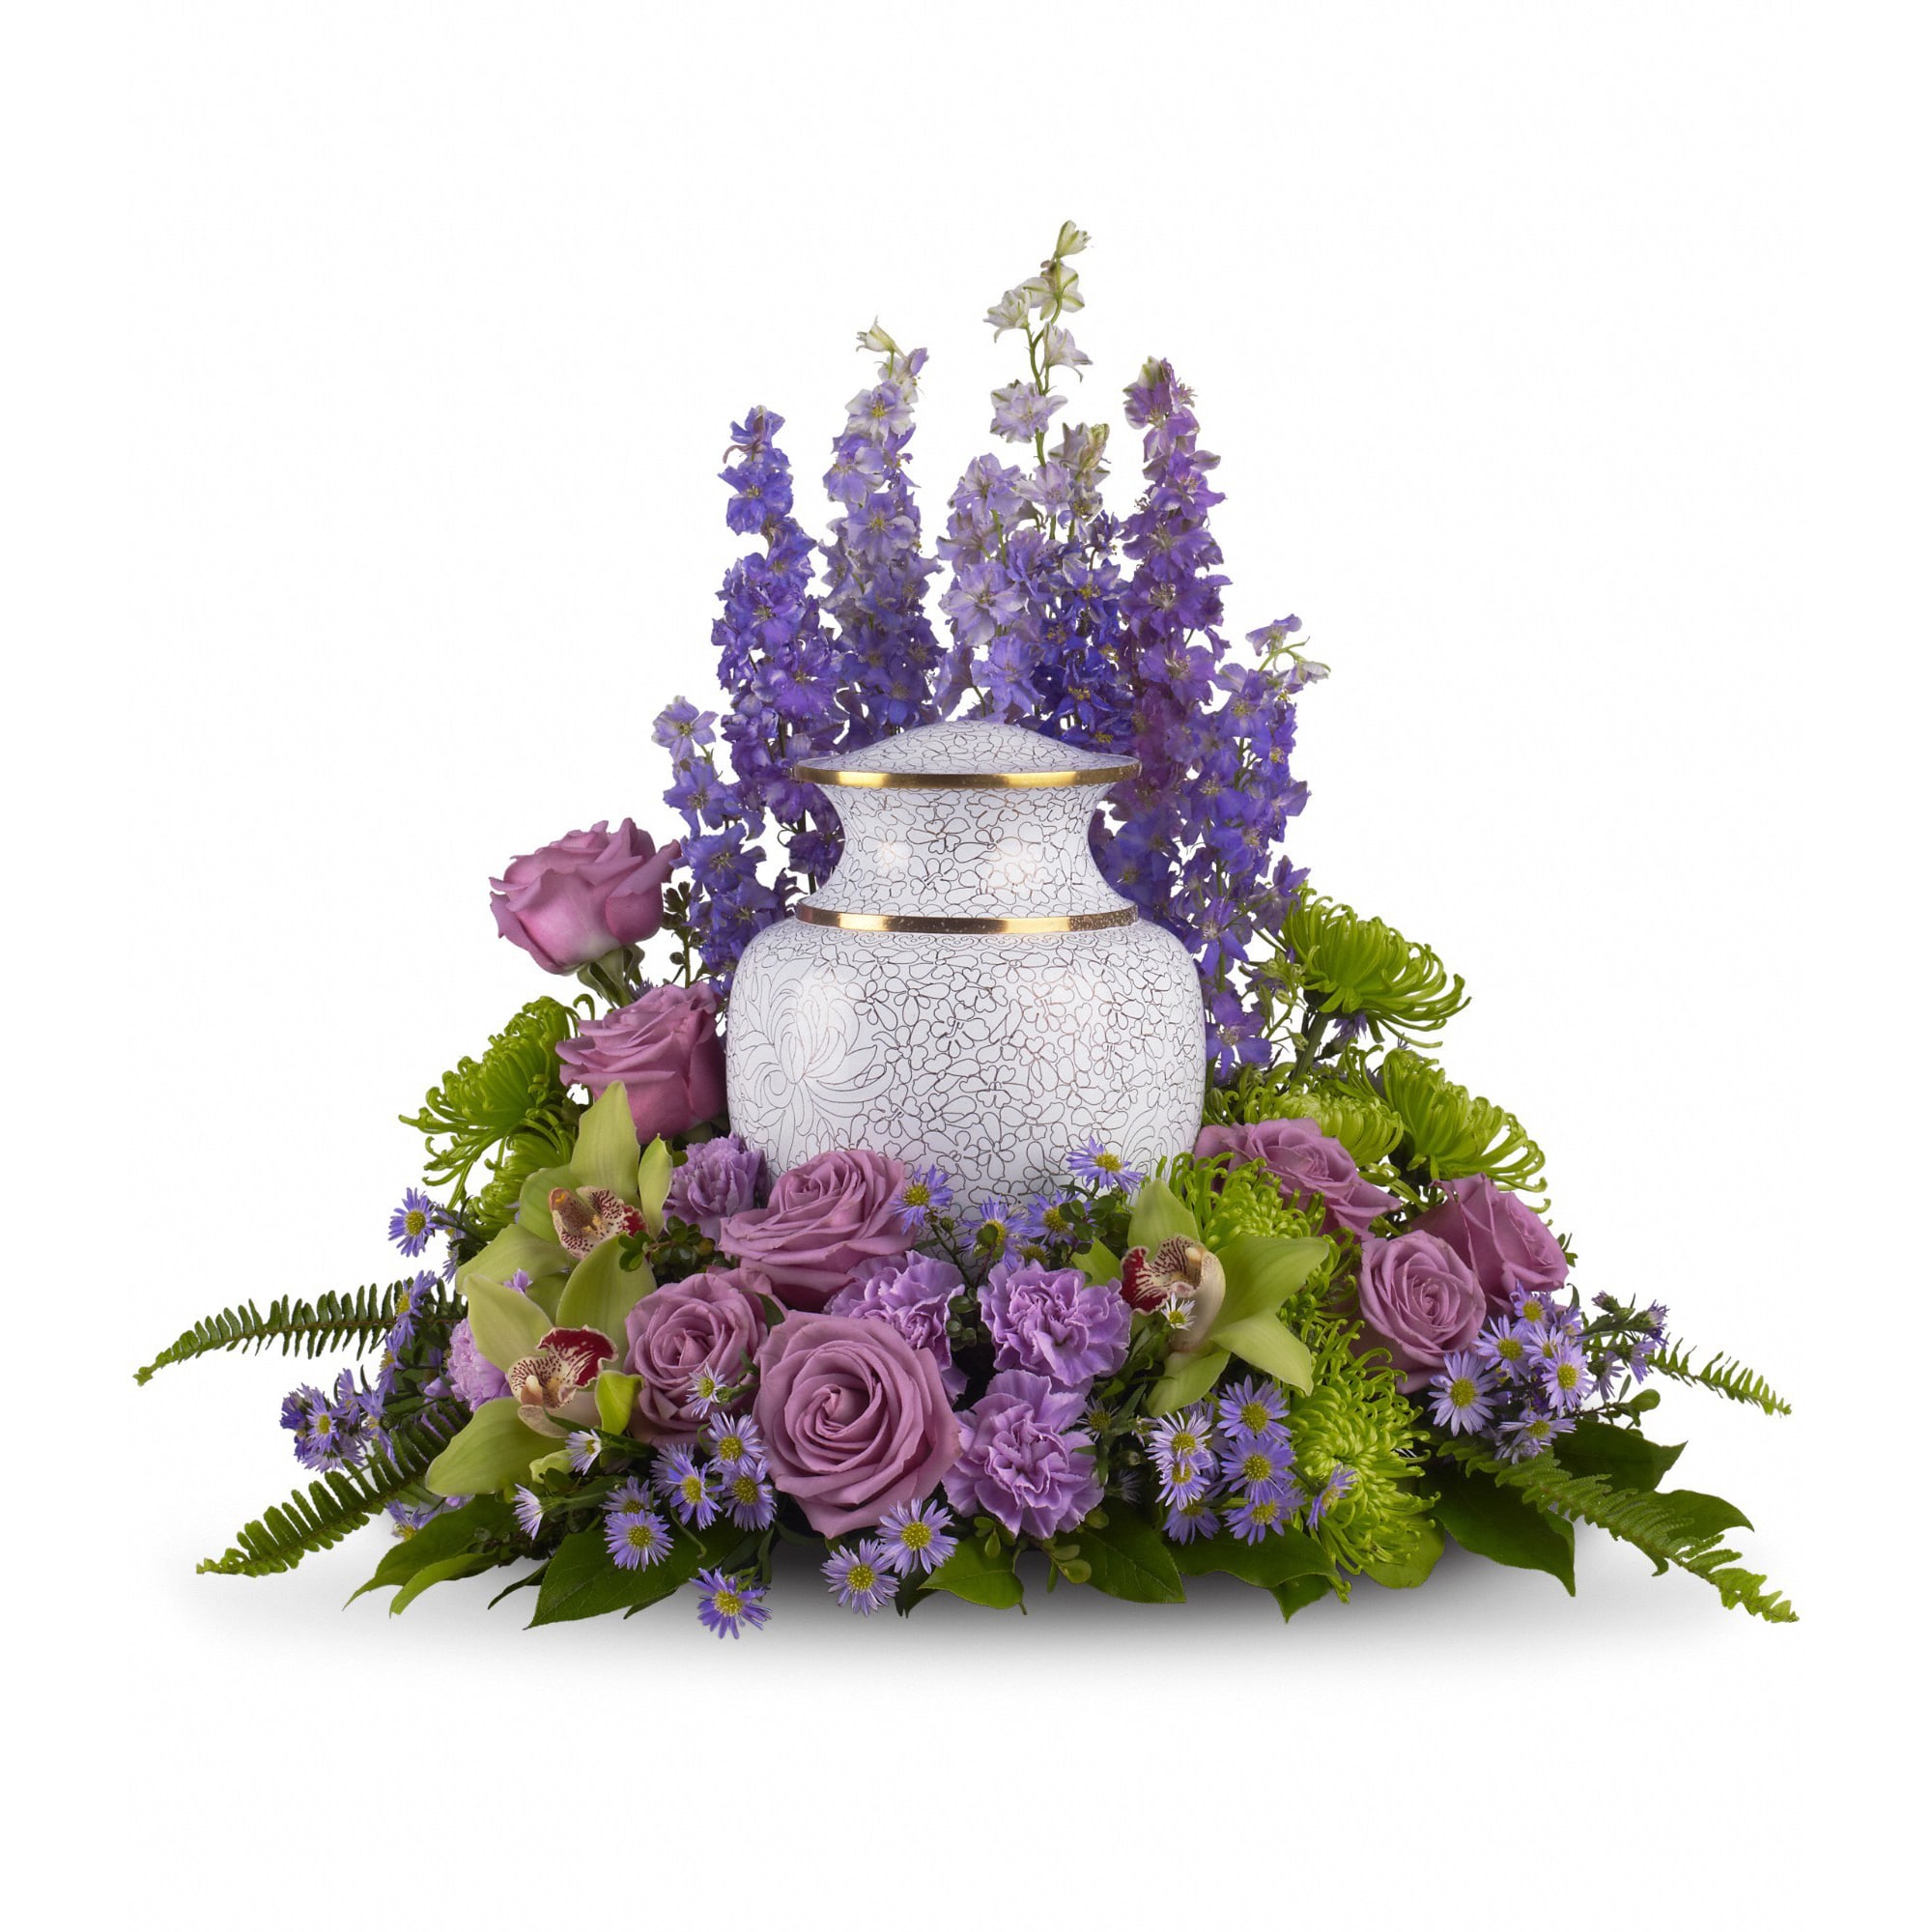 Meadows of Memories by Teleflora - Soft lavender and green blooms to surround the urn, like a peaceful, contemplative garden.  